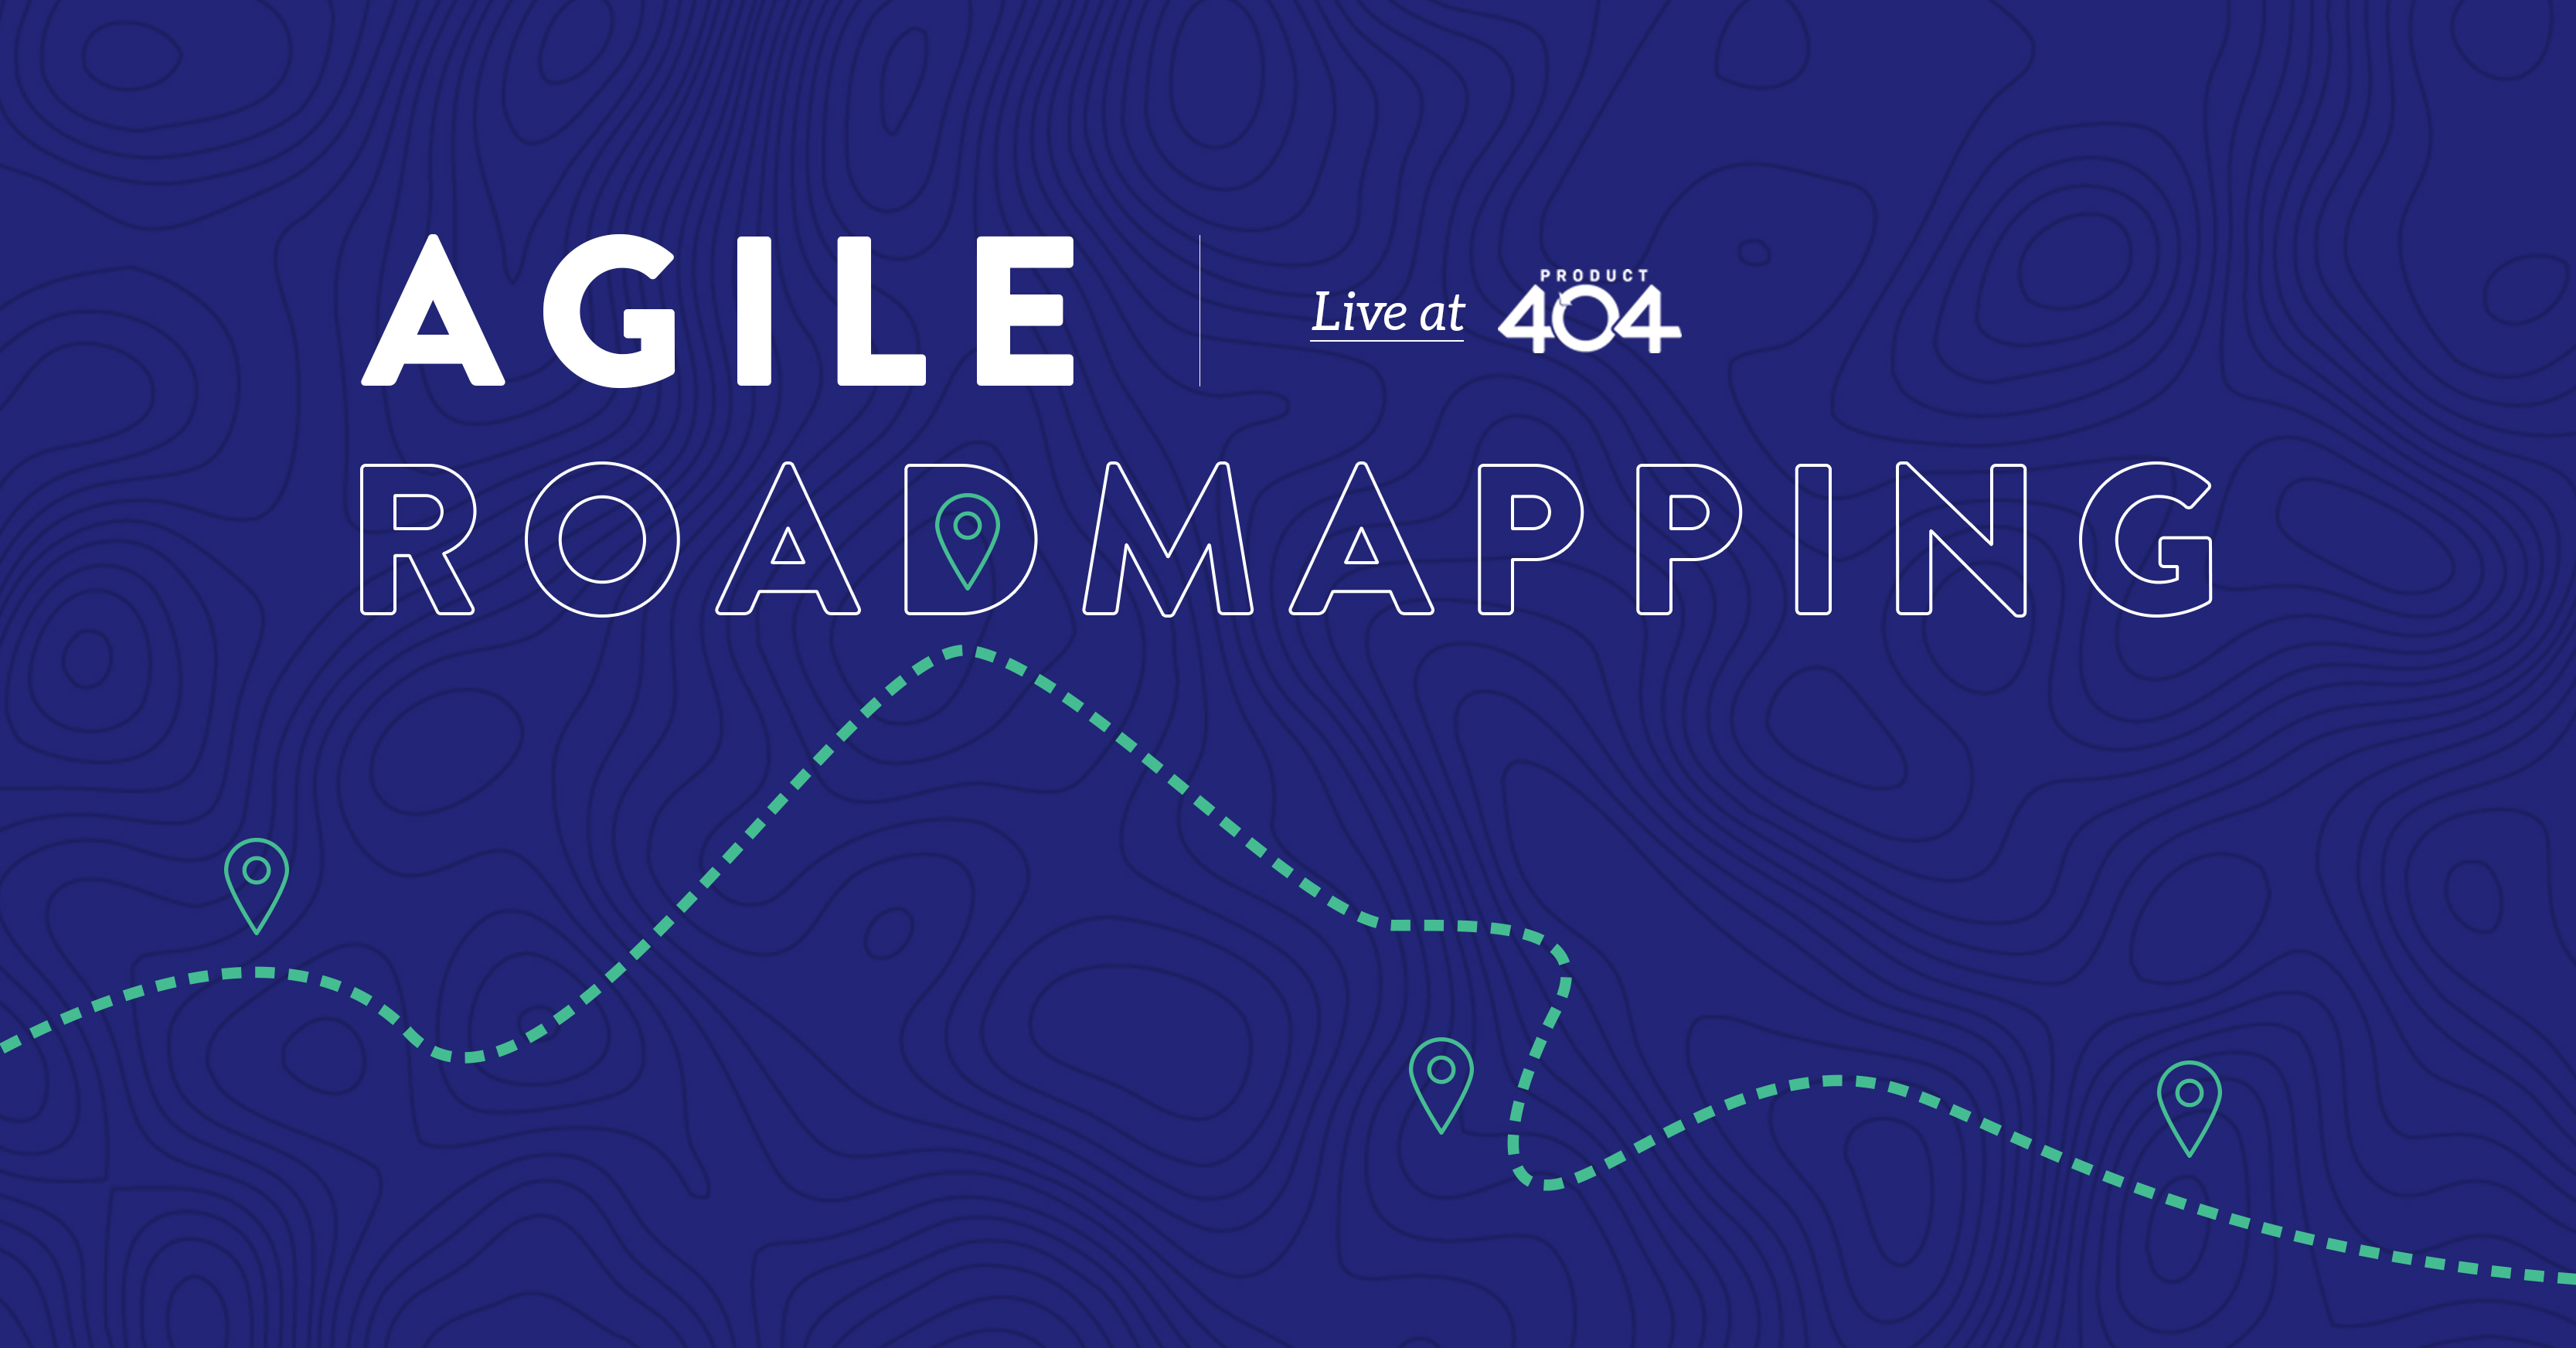 Agile RoadMapping at the Product404 Meetup